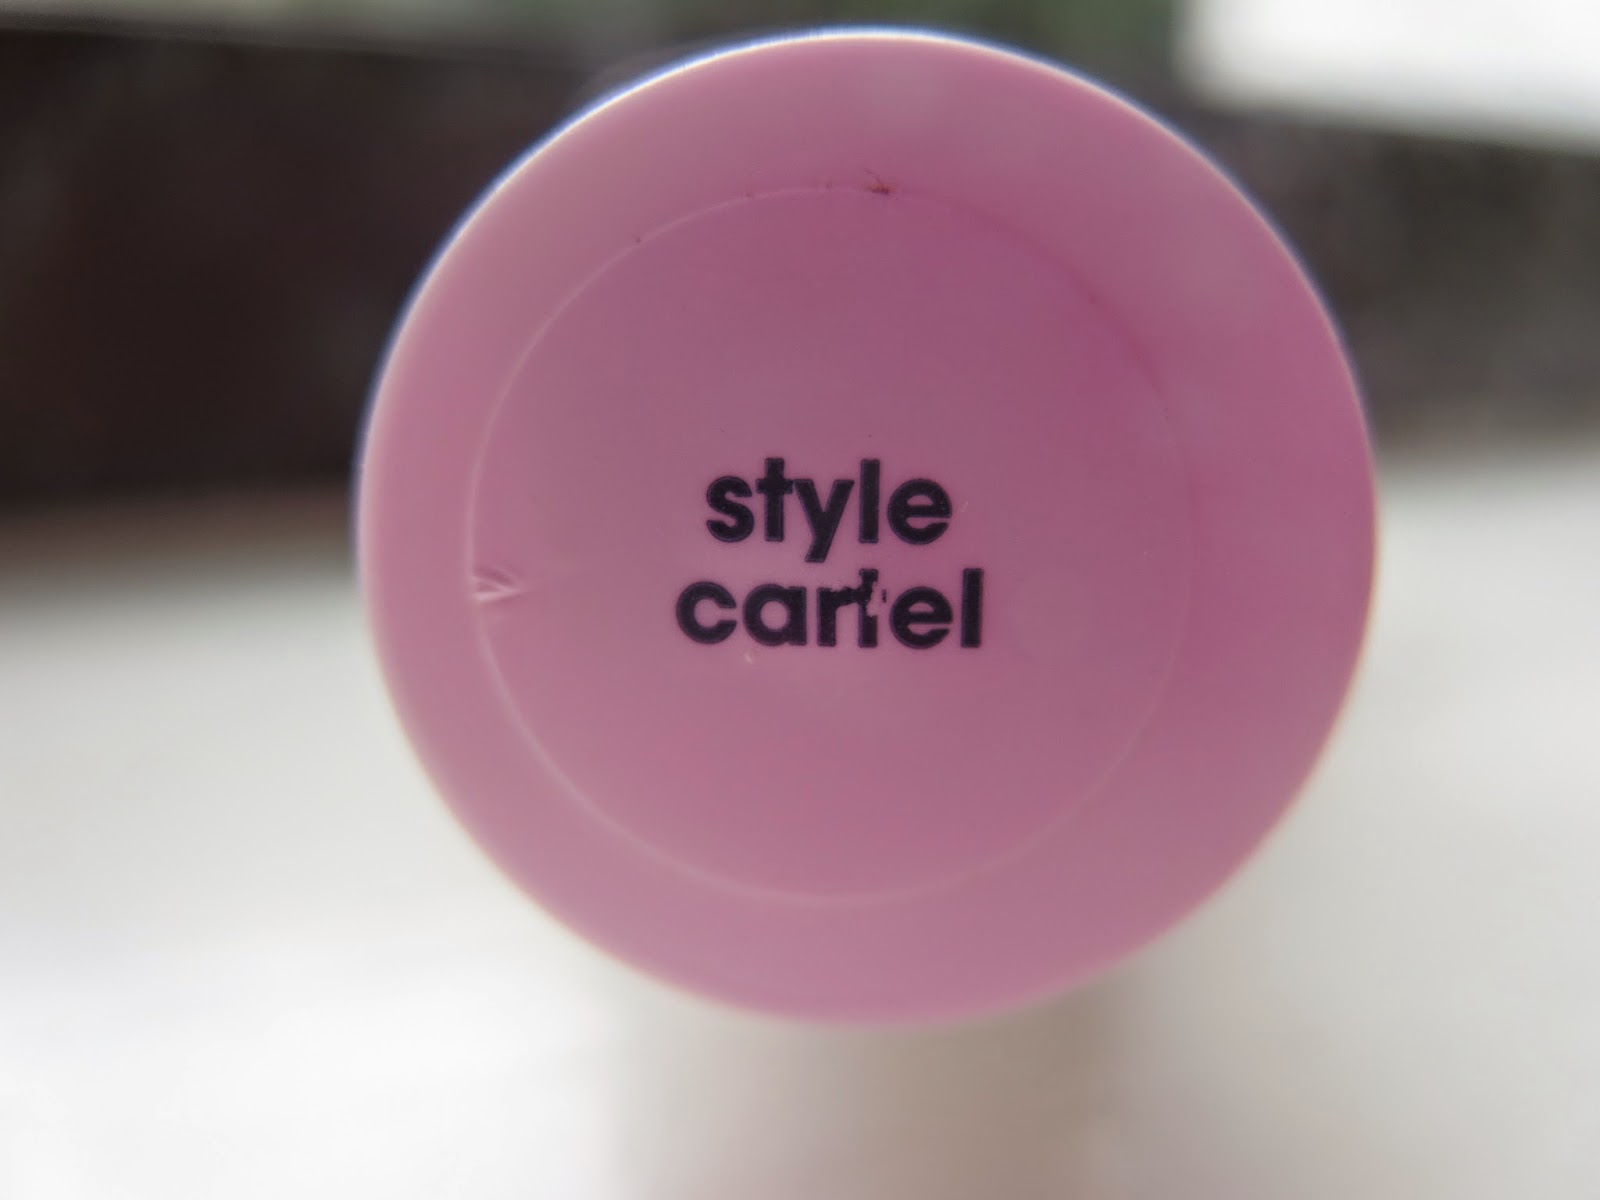 a picture of Essie's Style Cartel nail polish